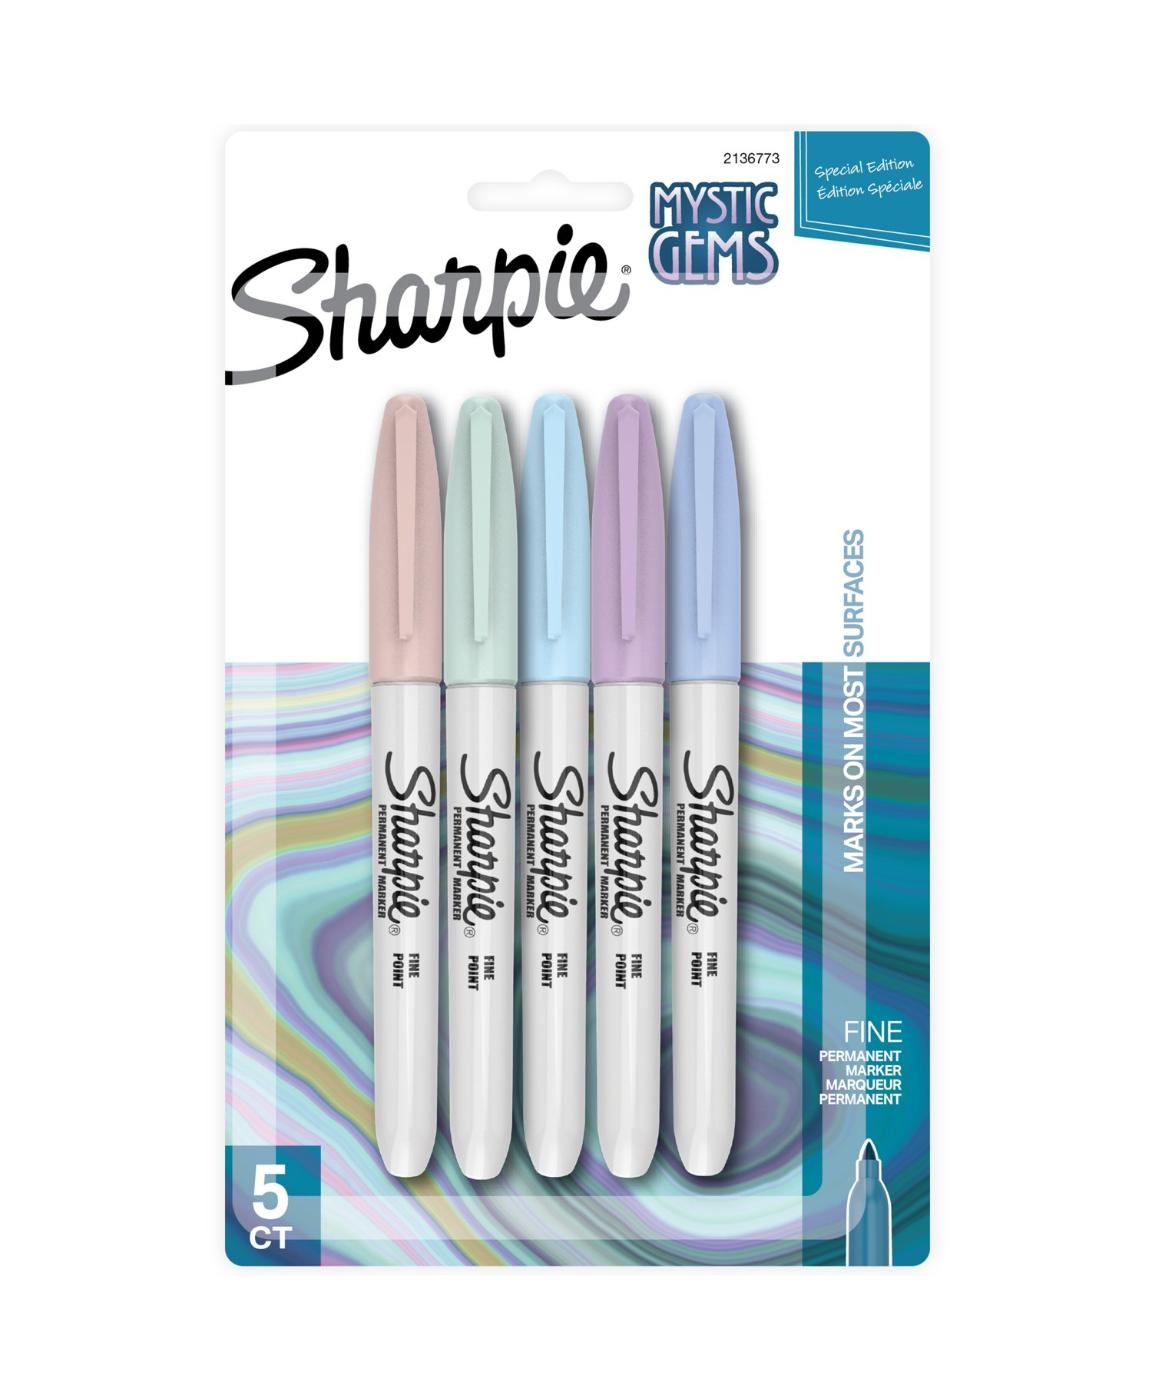 Sharpie Metallic Assorted Permanent Markers - Shop Markers at H-E-B